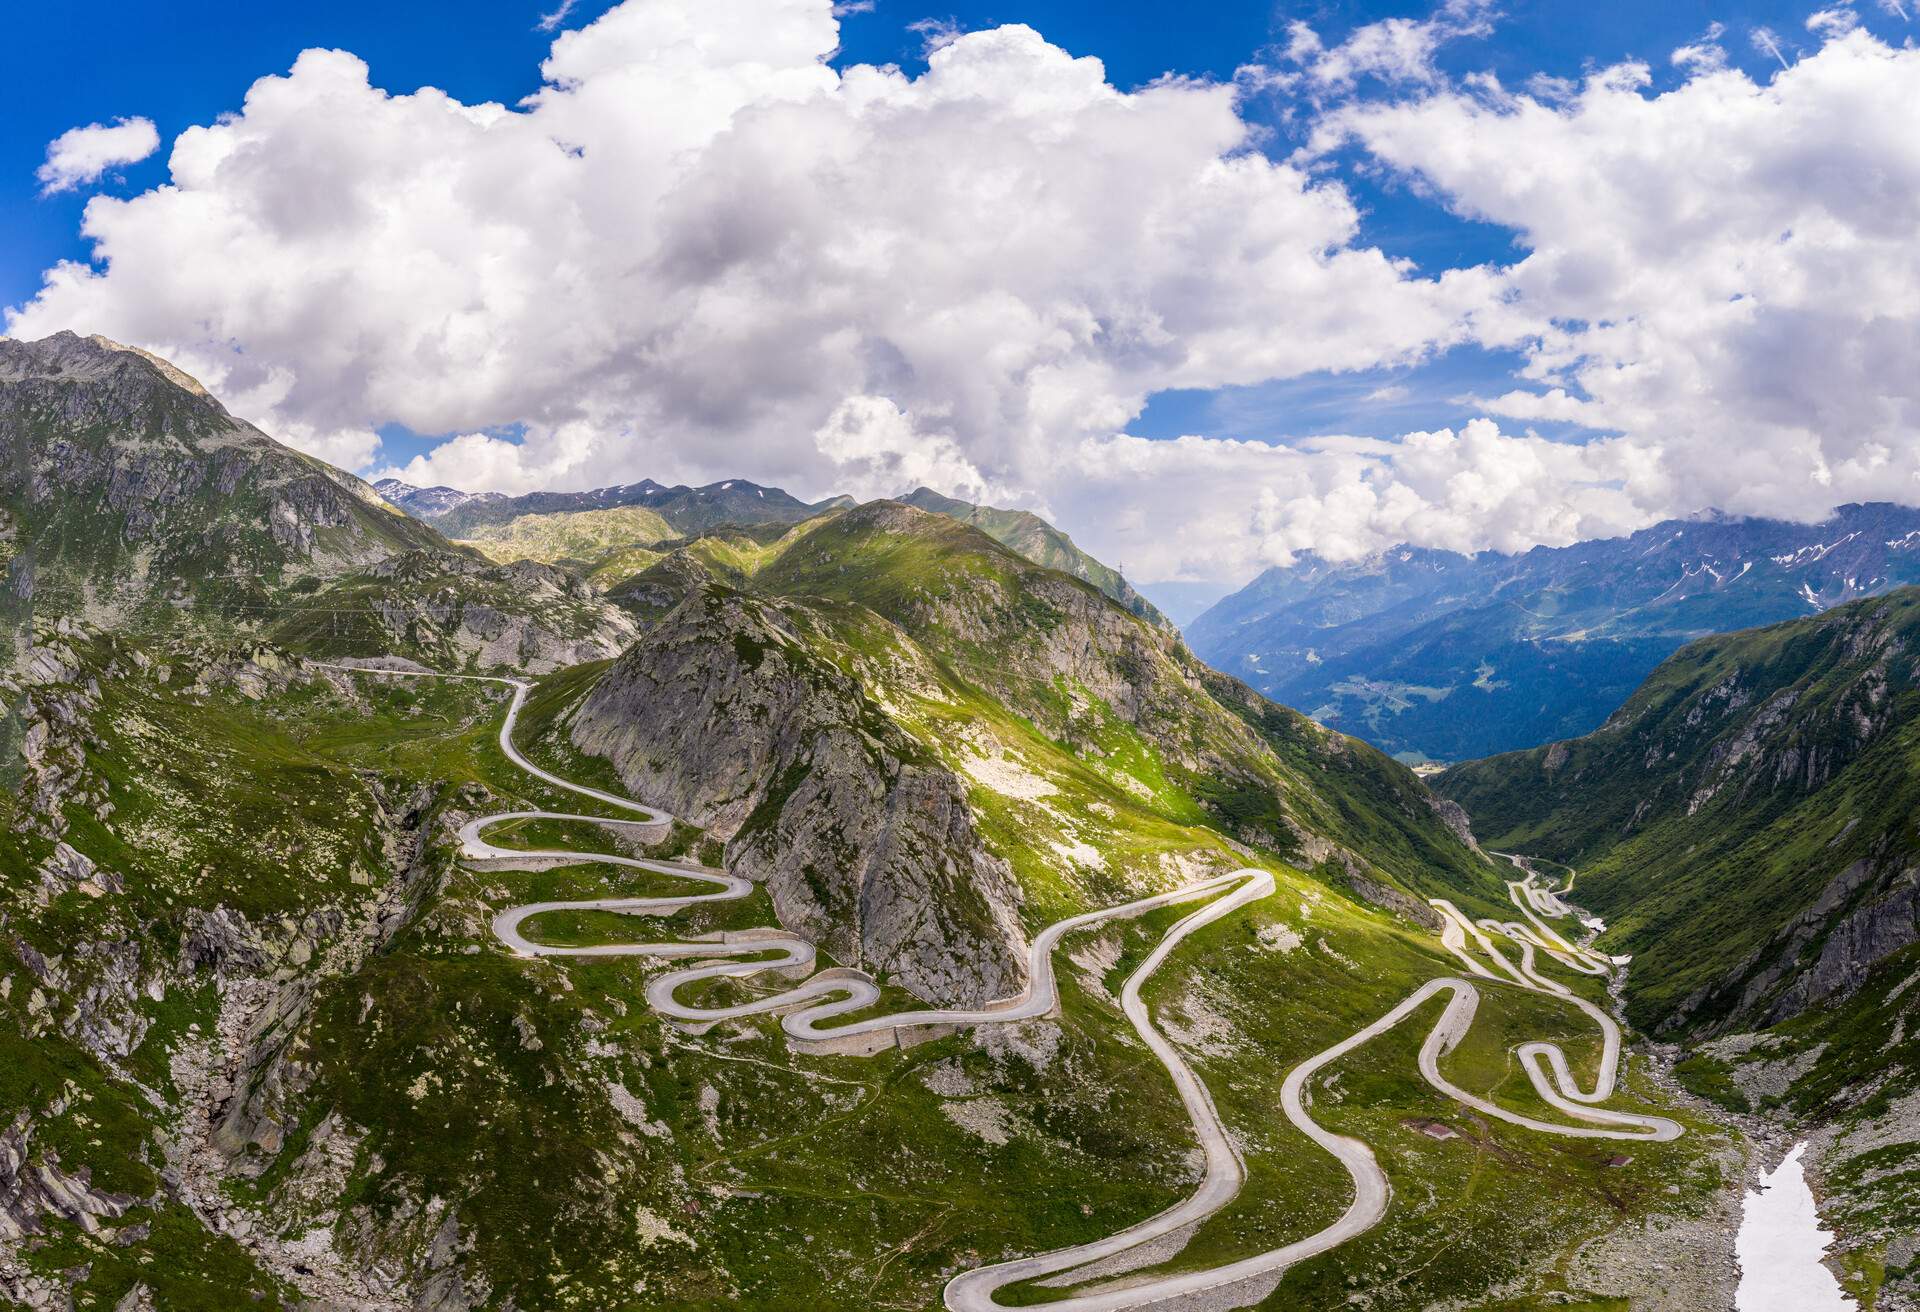 Dramatic aerial view of the gotthard pass ancient road, the Tremola, that links the canton of Ticino and Uri through the alps in Switzerland